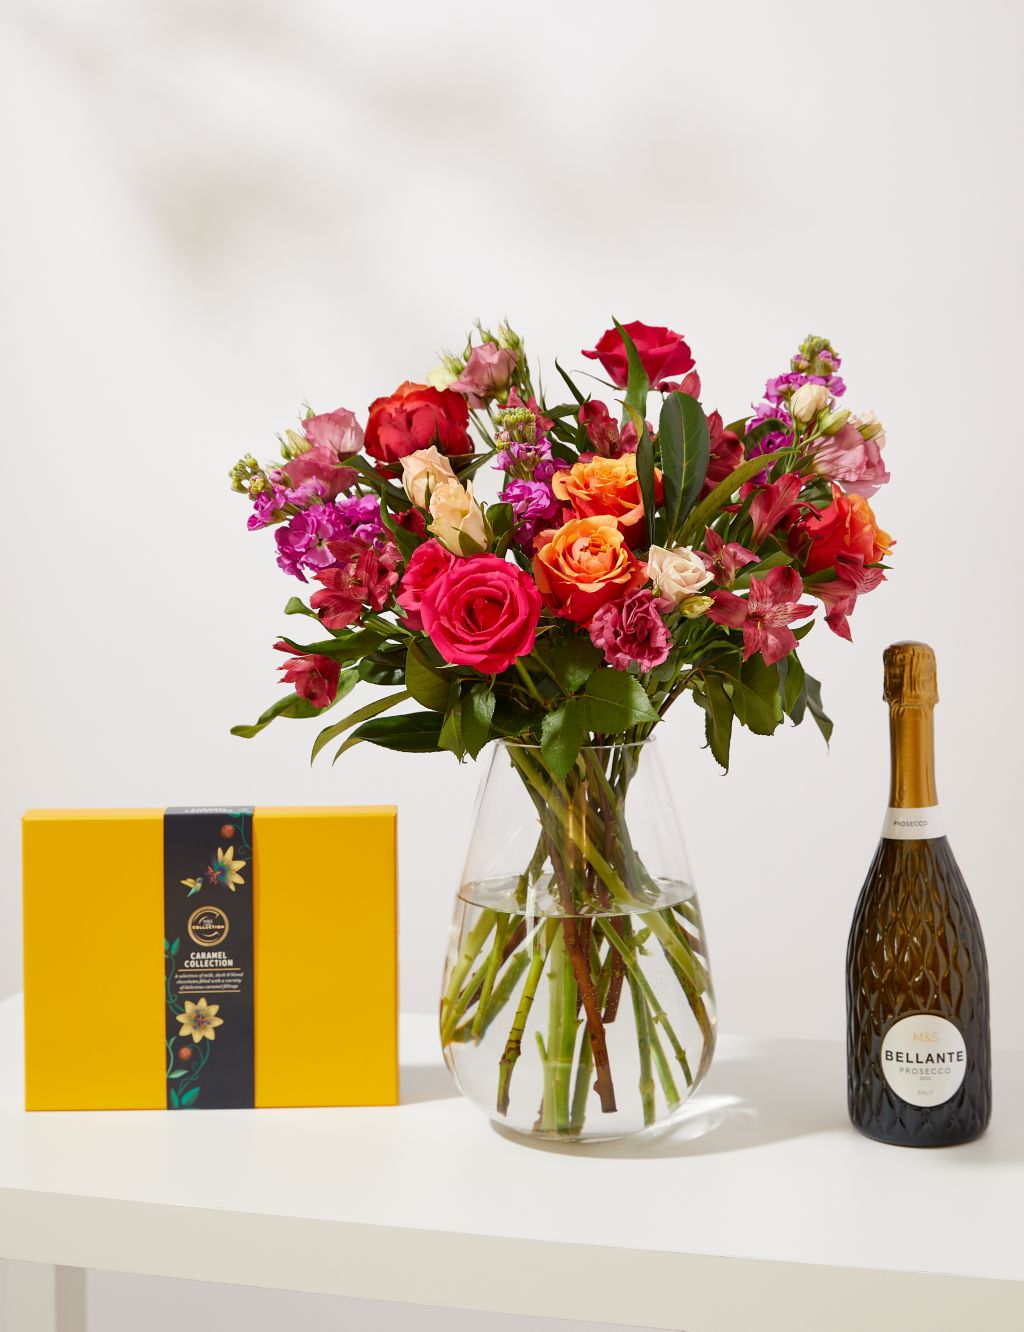 Roses, Lisianthus & Stock Bright Bouquet with Prosecco & Collection Caramel Chocolates